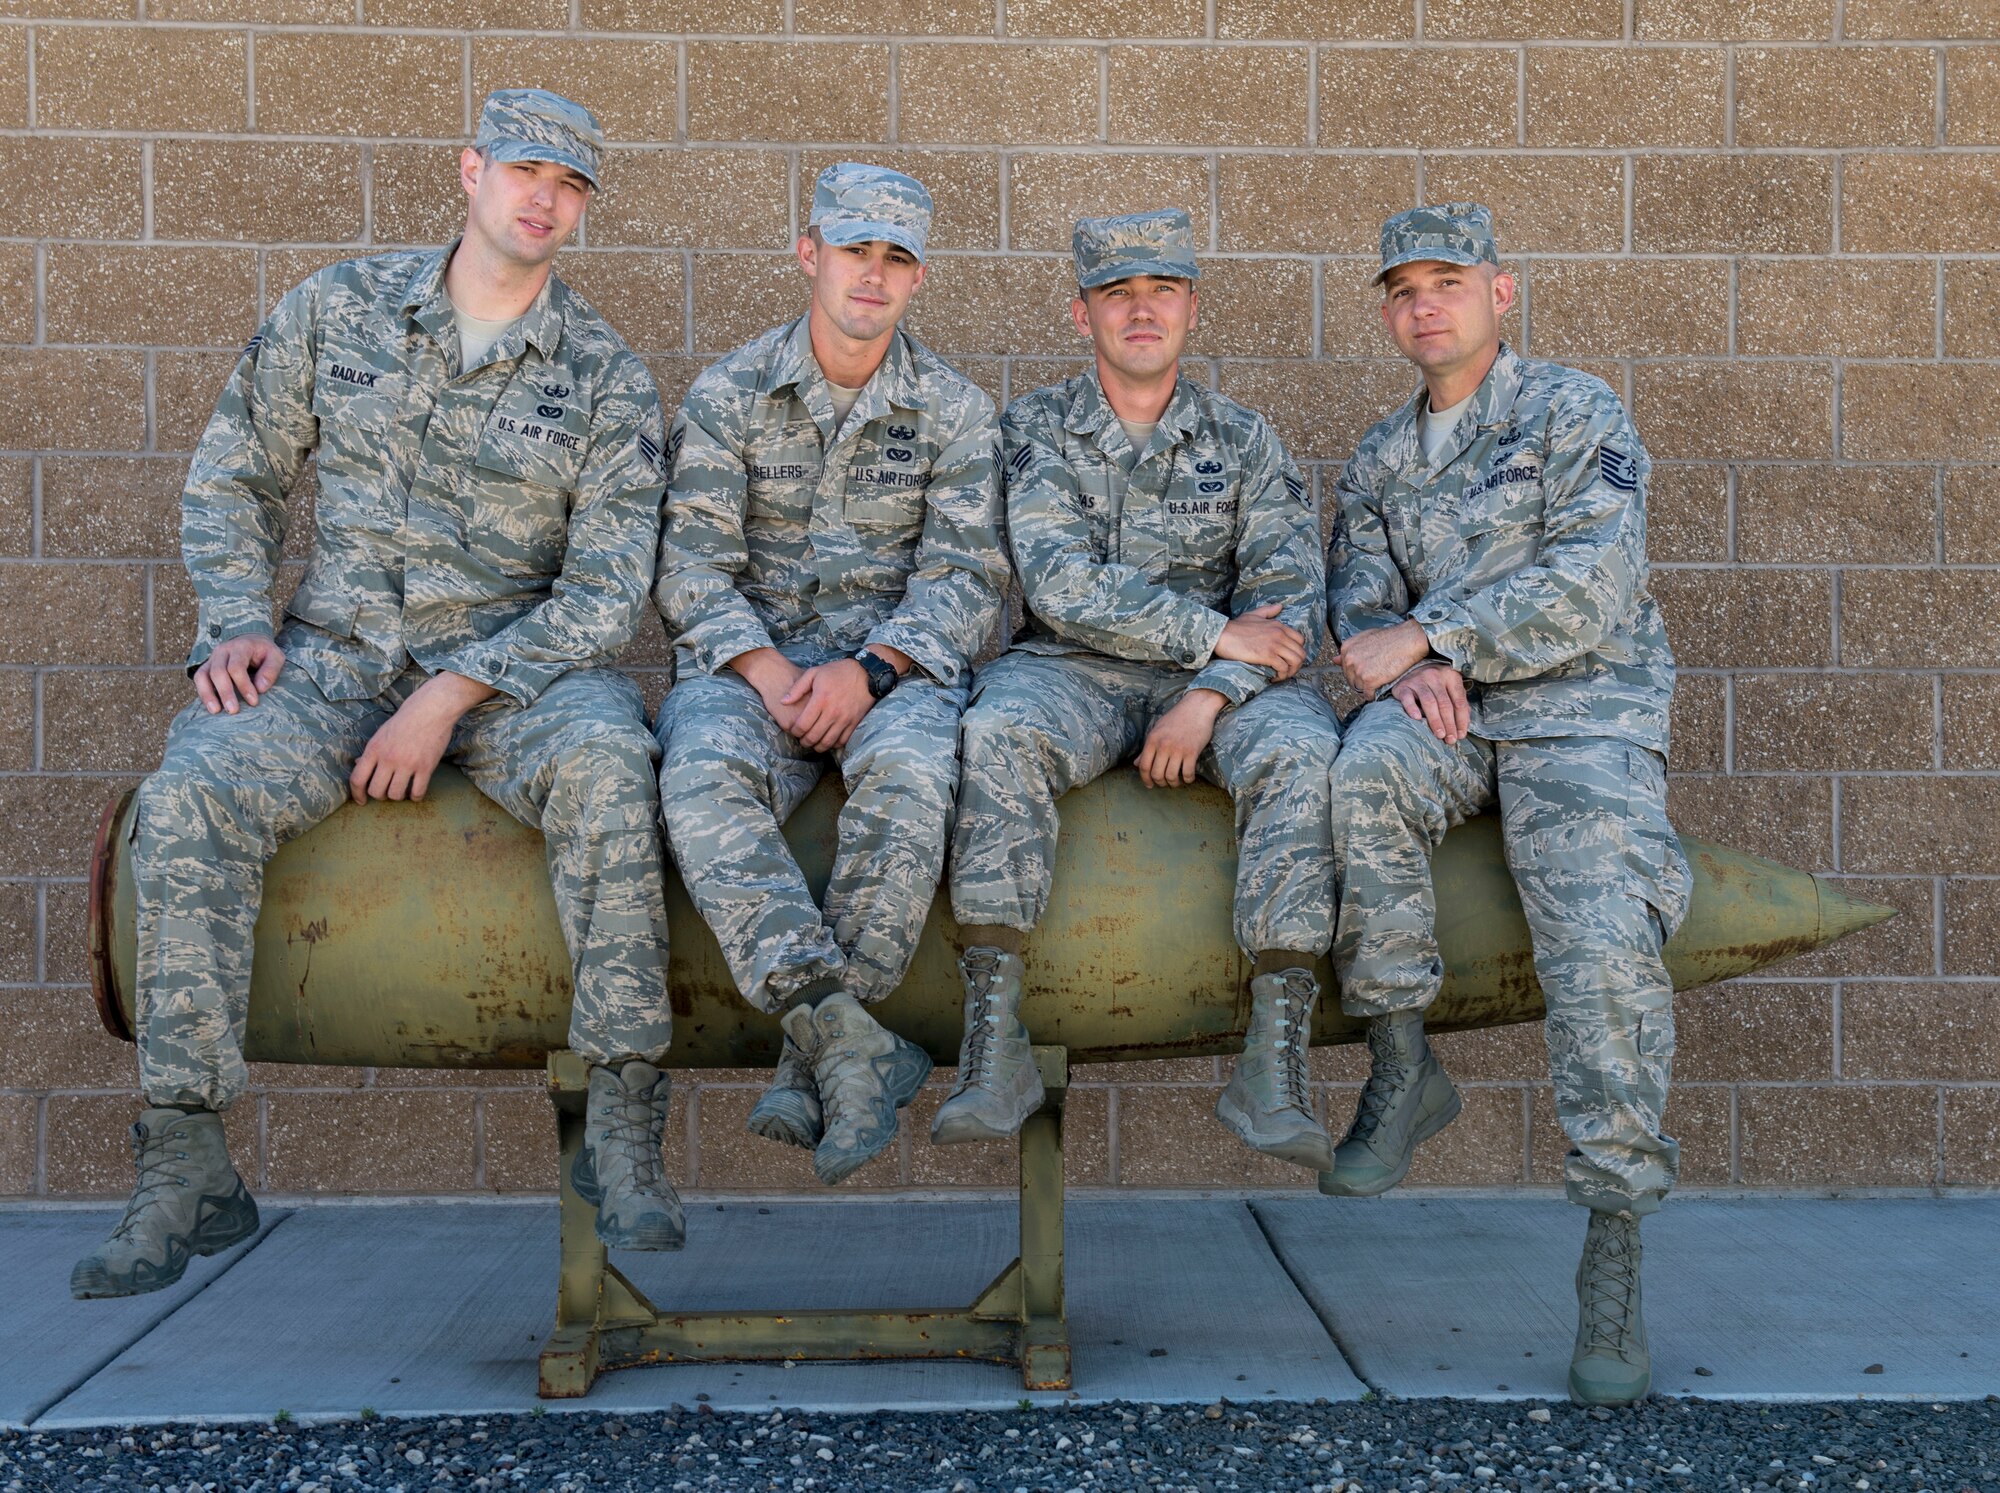 The standby Explosive Ordnance Disposal team that responded to the Cottonwood, Idaho, call on May 13, 2015, and their team chief (far right) from the 366th Civil Engineer Squadron at Mountain Home Air Force Base, Idaho, pose for a group photo. EOD credits their success not only to training but also to the teamwork and high morale they have within the shop. (U.S. Air Force photo by Airman 1st Class Jessica H. Smith/RELEASED)